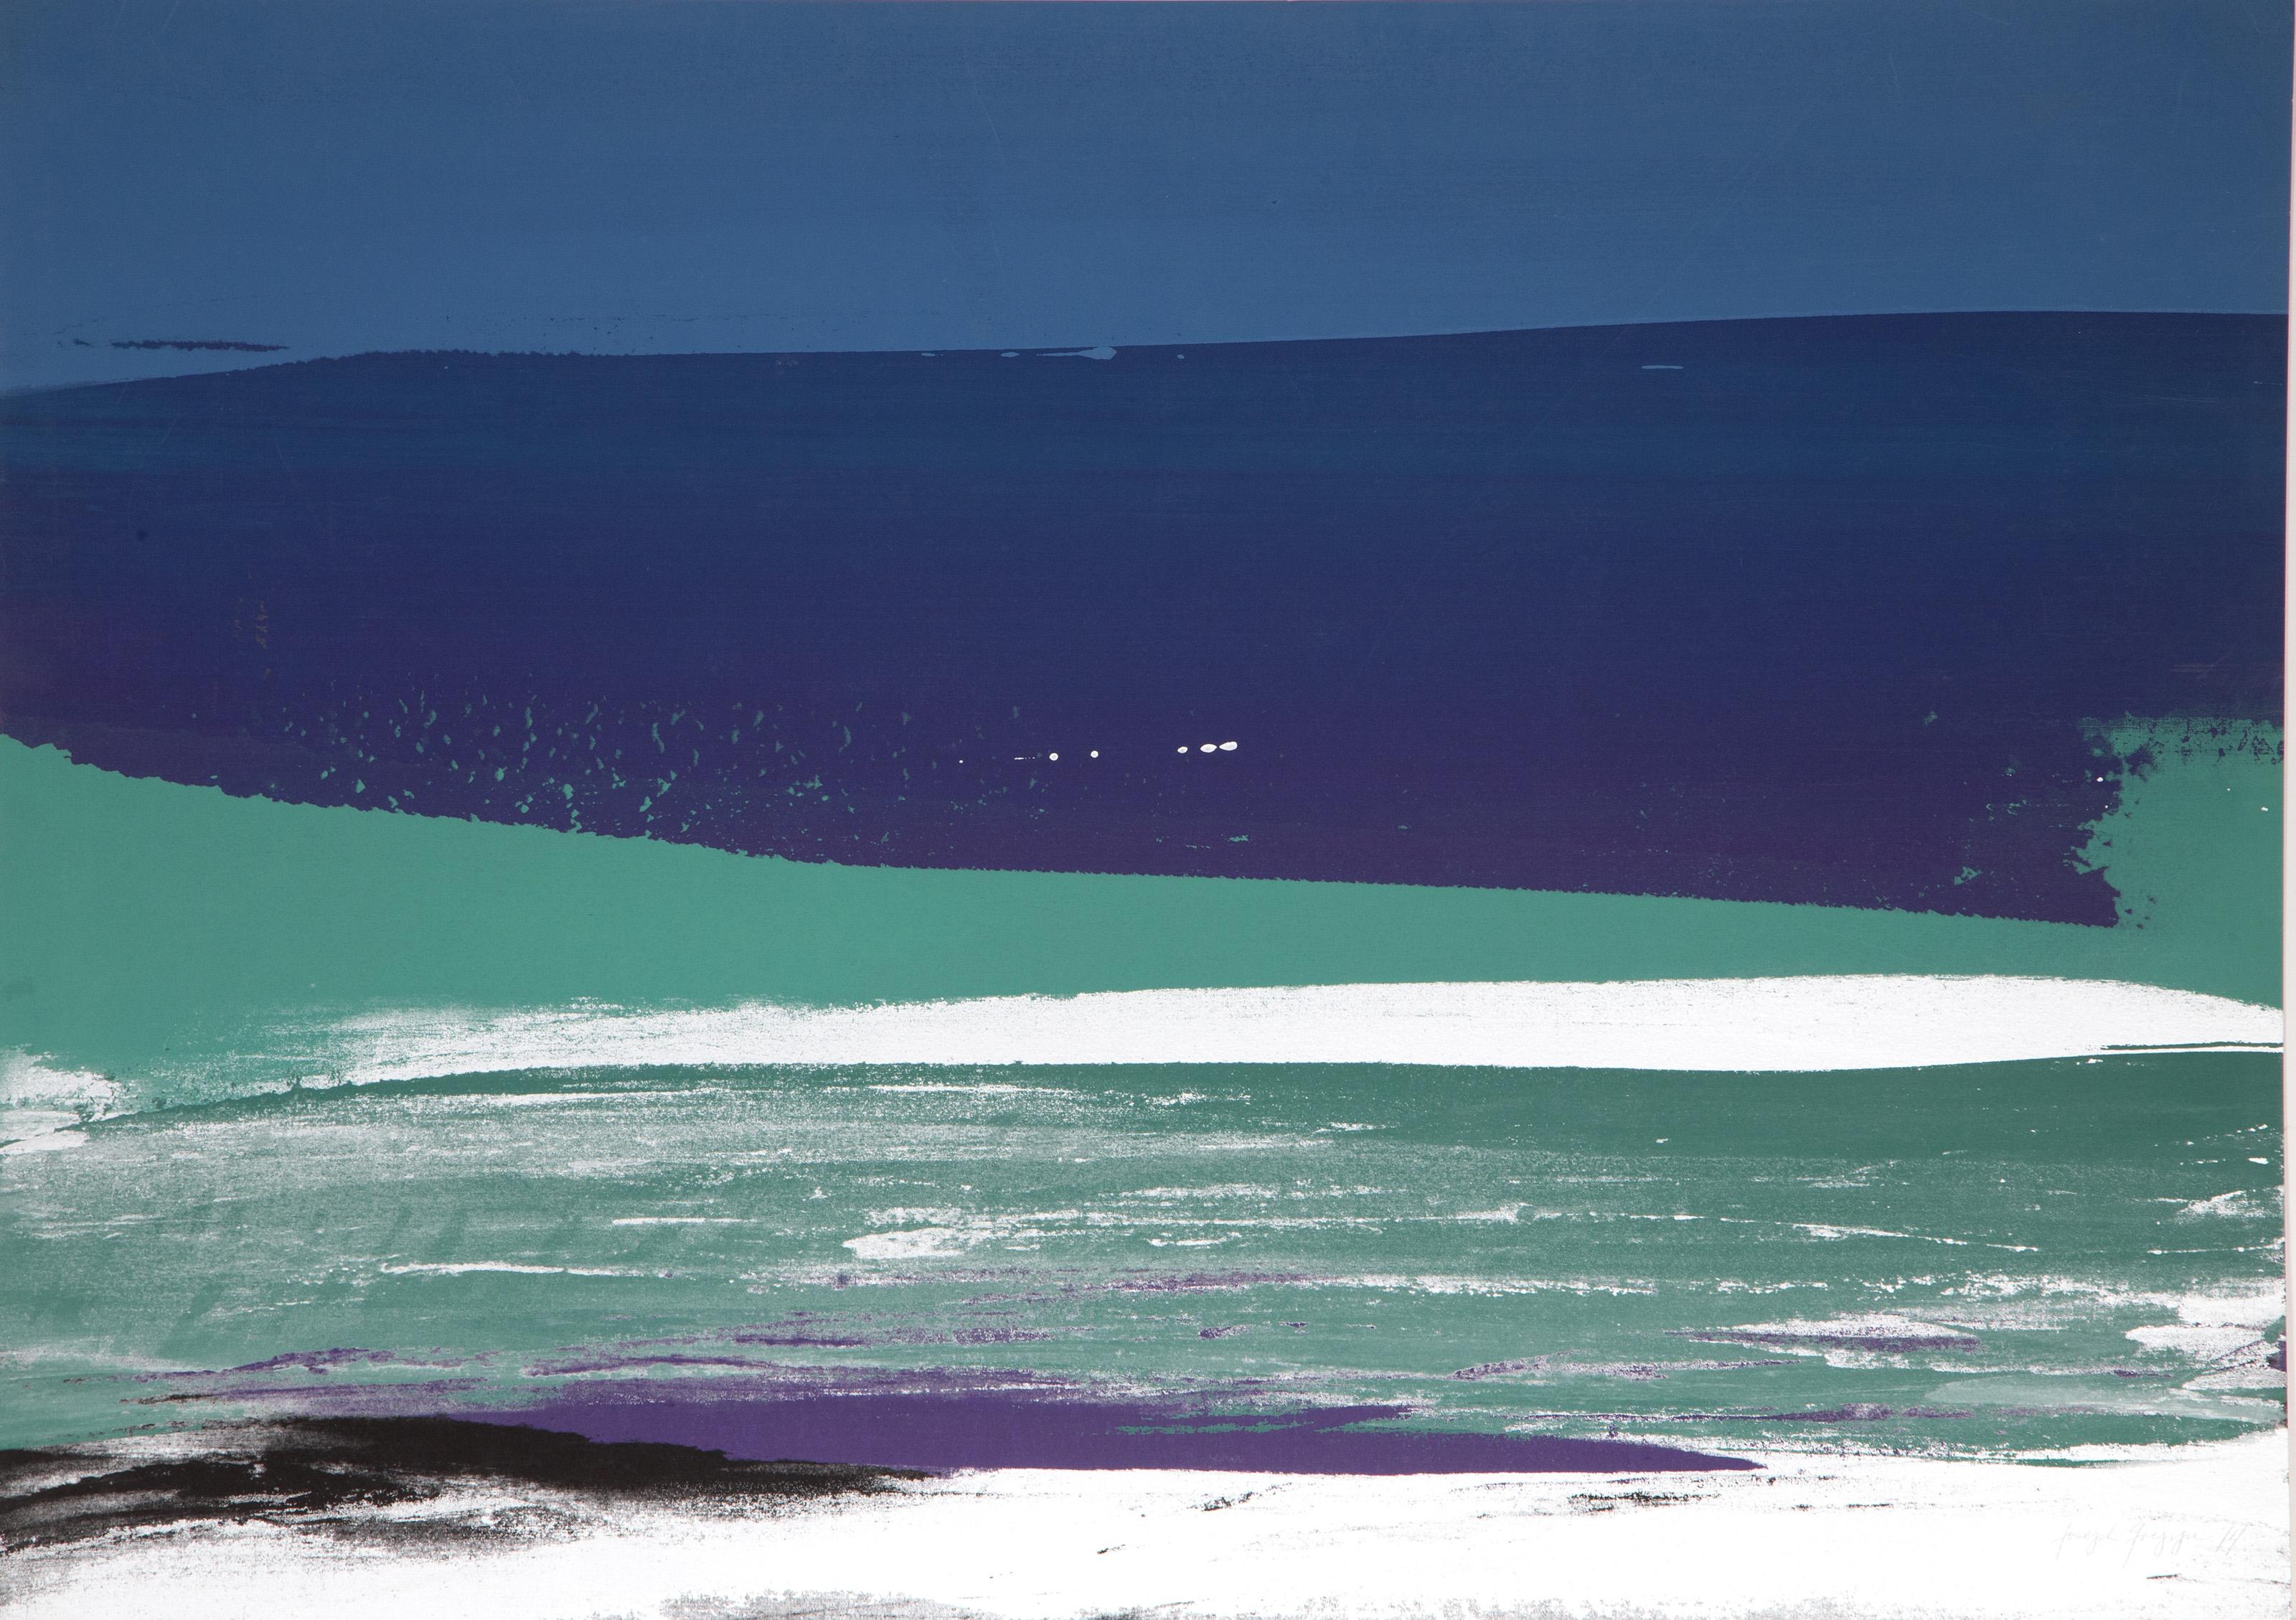 Seascape in Blue, Green, Black and White
Joseph Grippi, American (1924–2001)
Date: 1974
Screenprint, signed and dated in pencil
Size: 28 x 39 in. (71.12 x 99.06 cm)